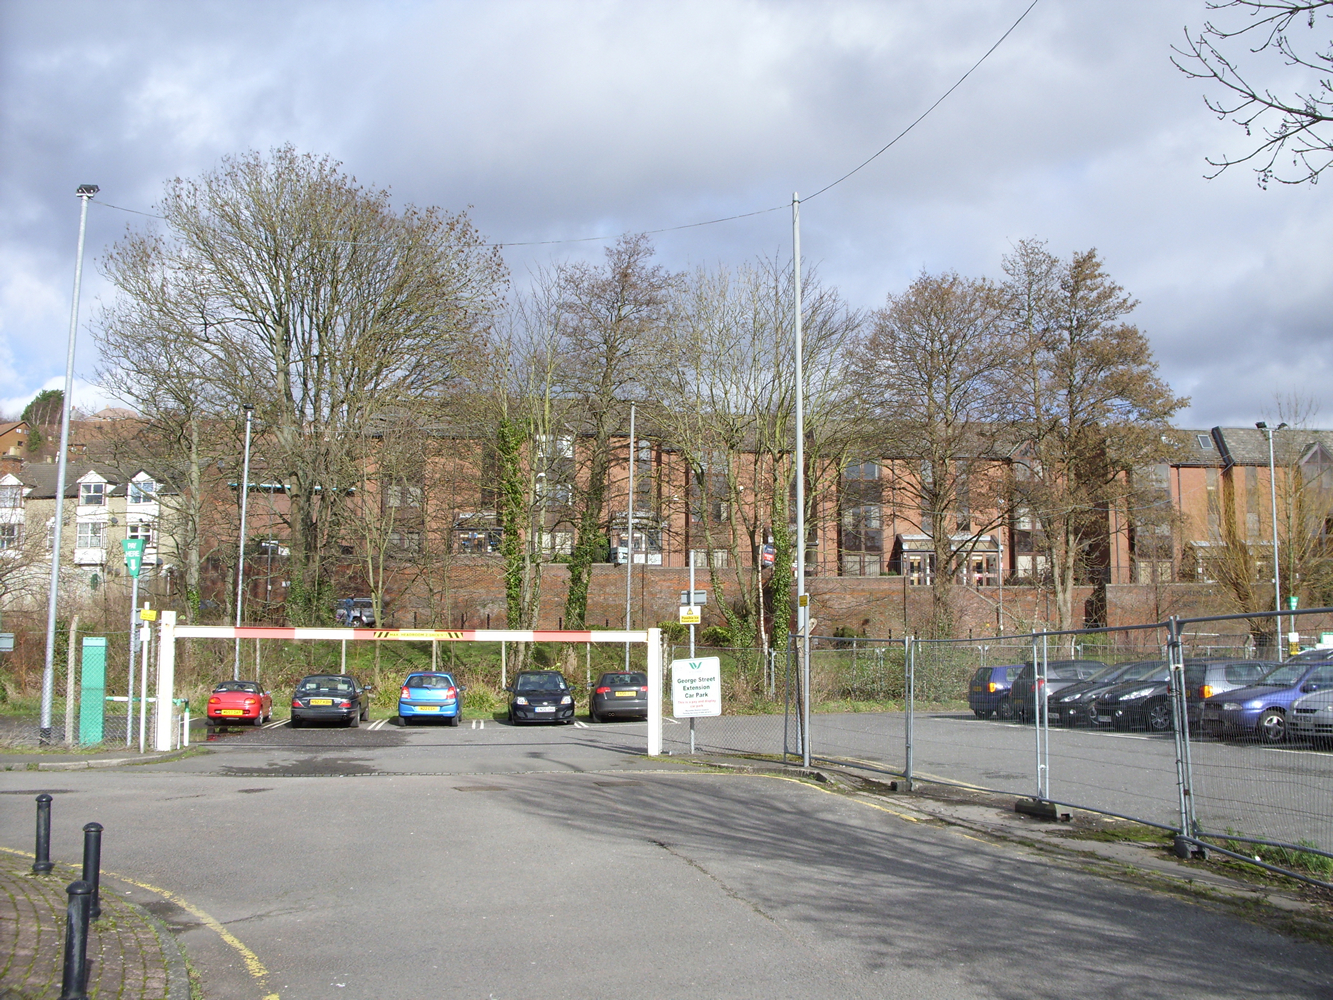 George Street Car Park (With Trees)